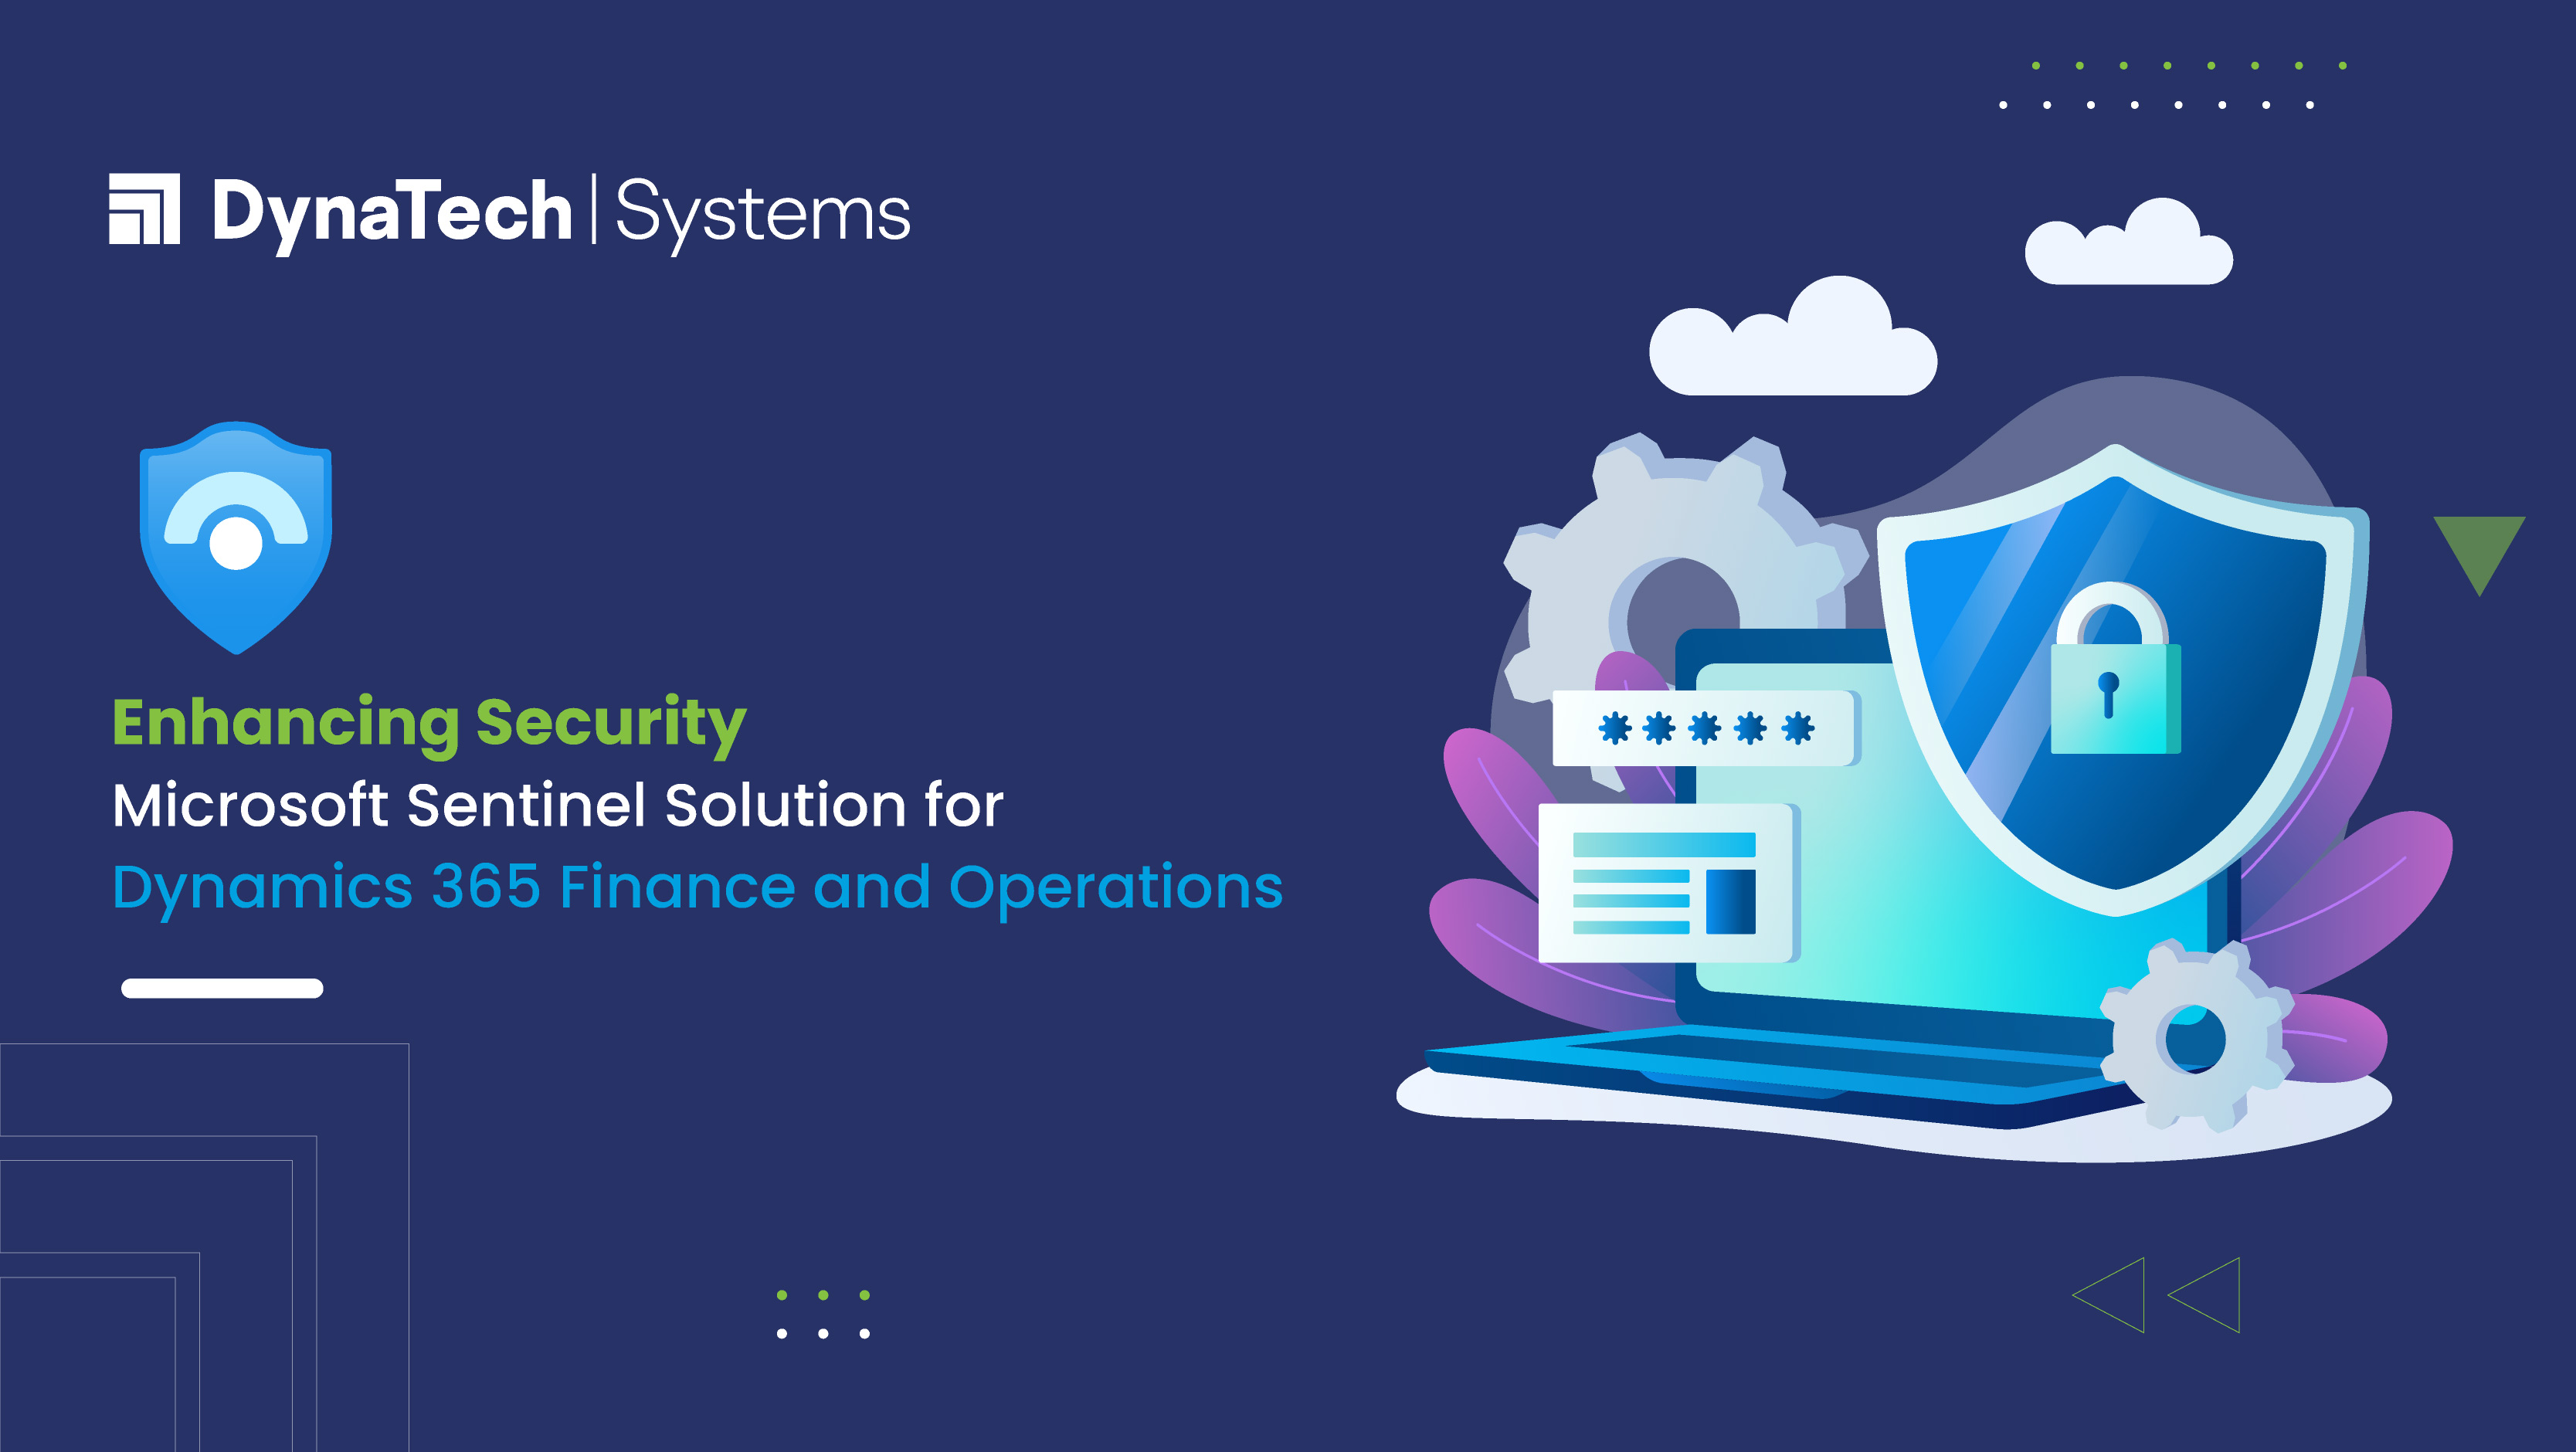 Enhancing Security: Microsoft Sentinel Solution for Dynamics 365 Finance and Operations